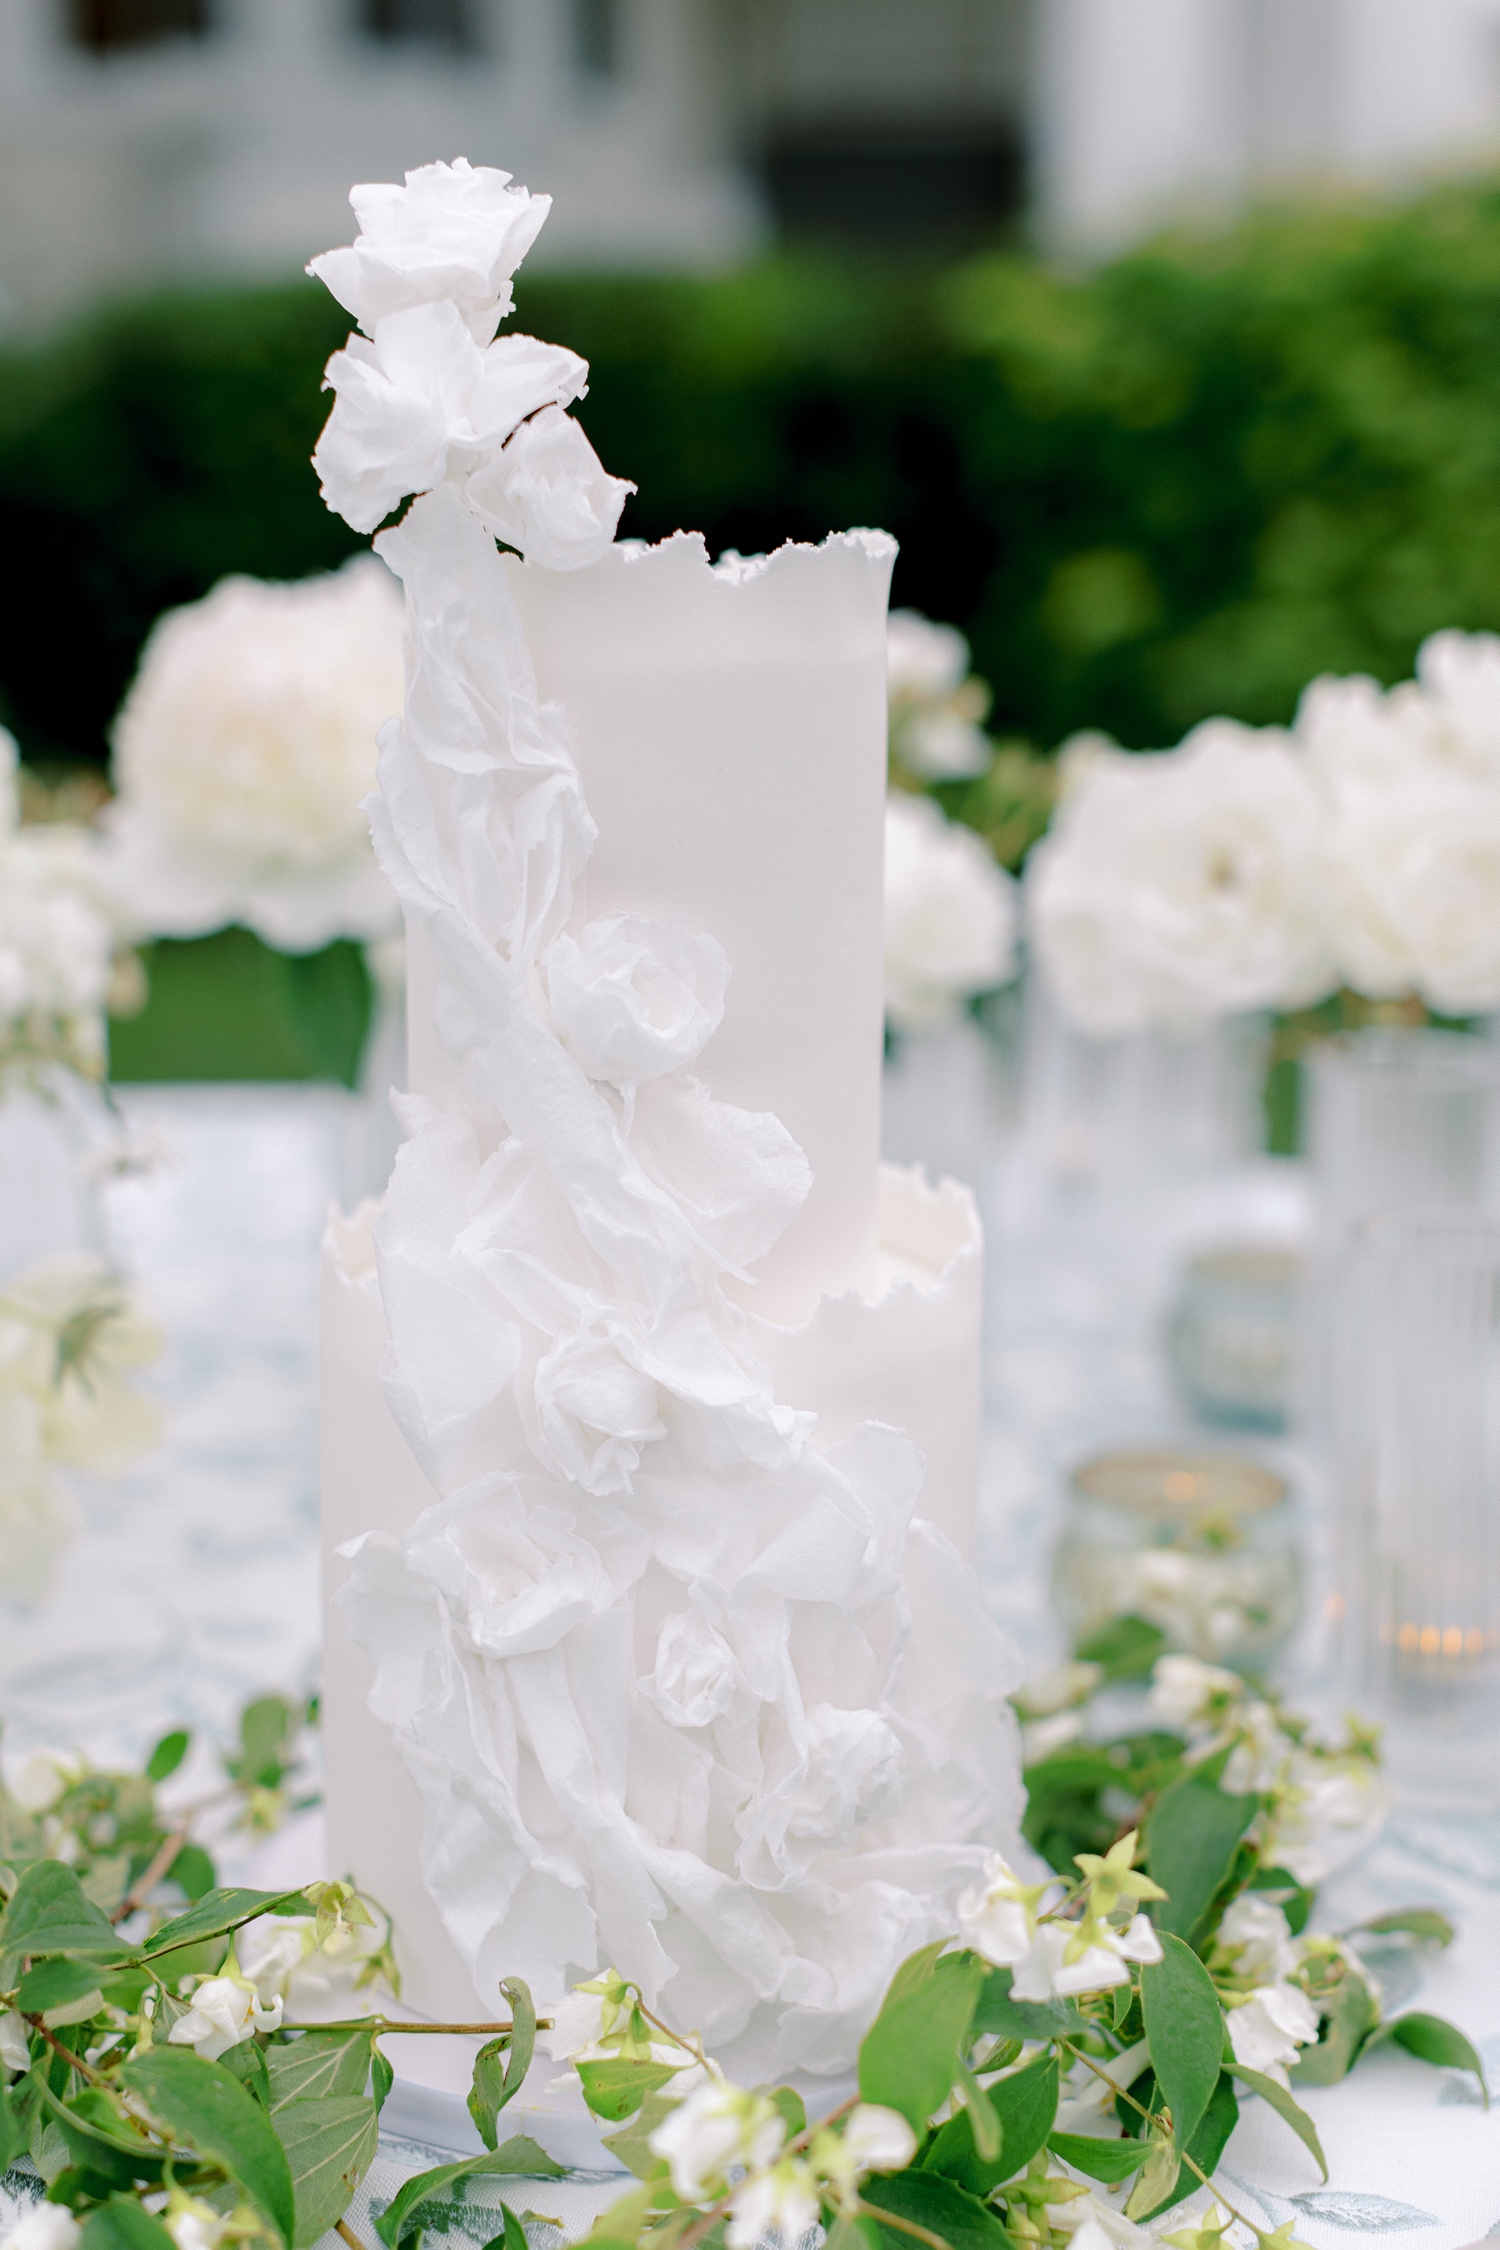 Romantic Ivory cake by Layered Cake Artistry for Moore Mansion Wedding